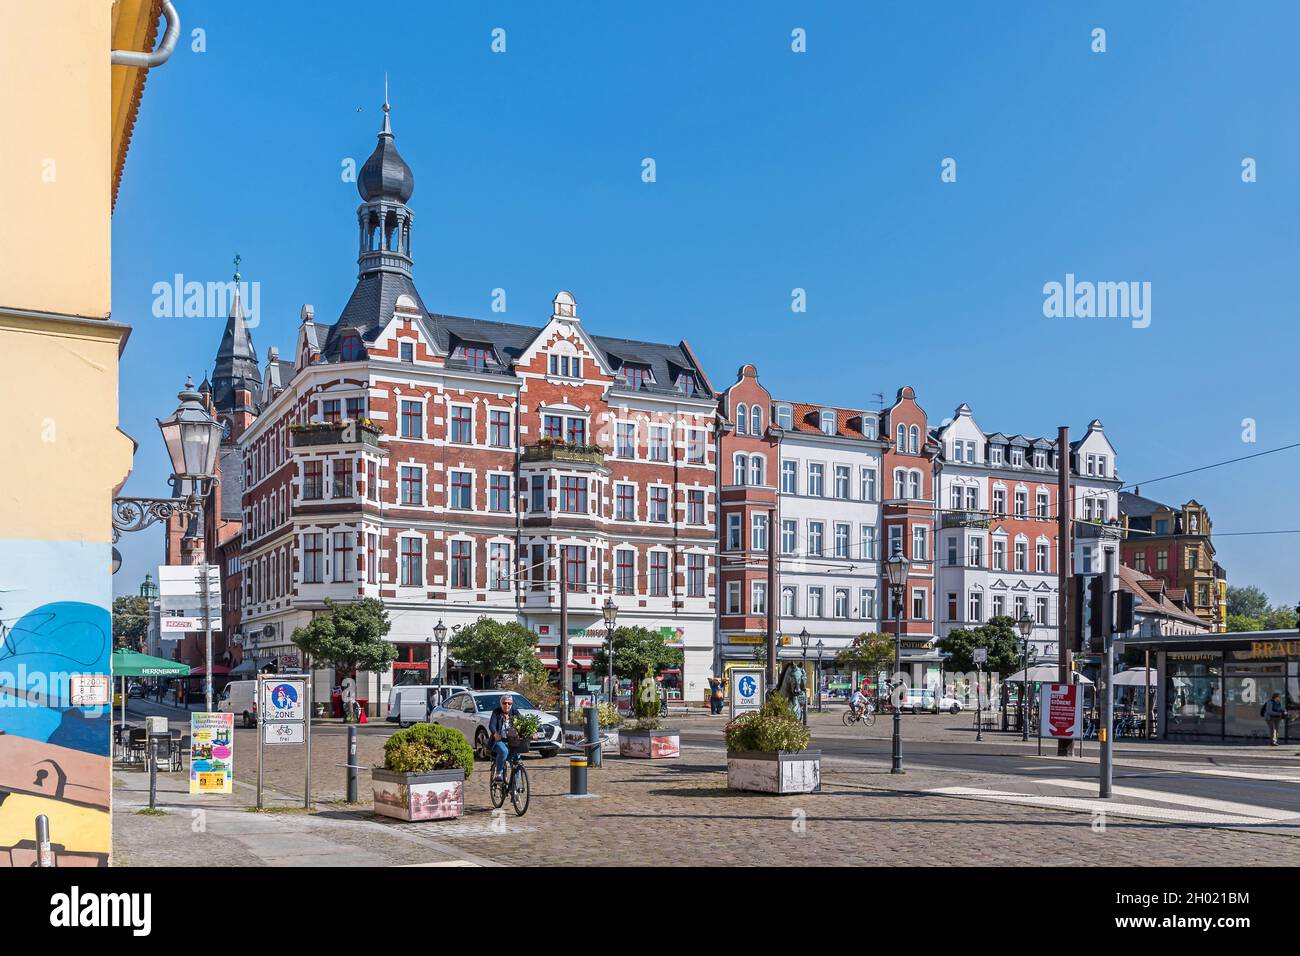 Berlin, Germany - September 6, 2021: Palace Square in the old town of Koepenick with the listed residential and commercial building Alt-Koepenick 32, Stock Photo